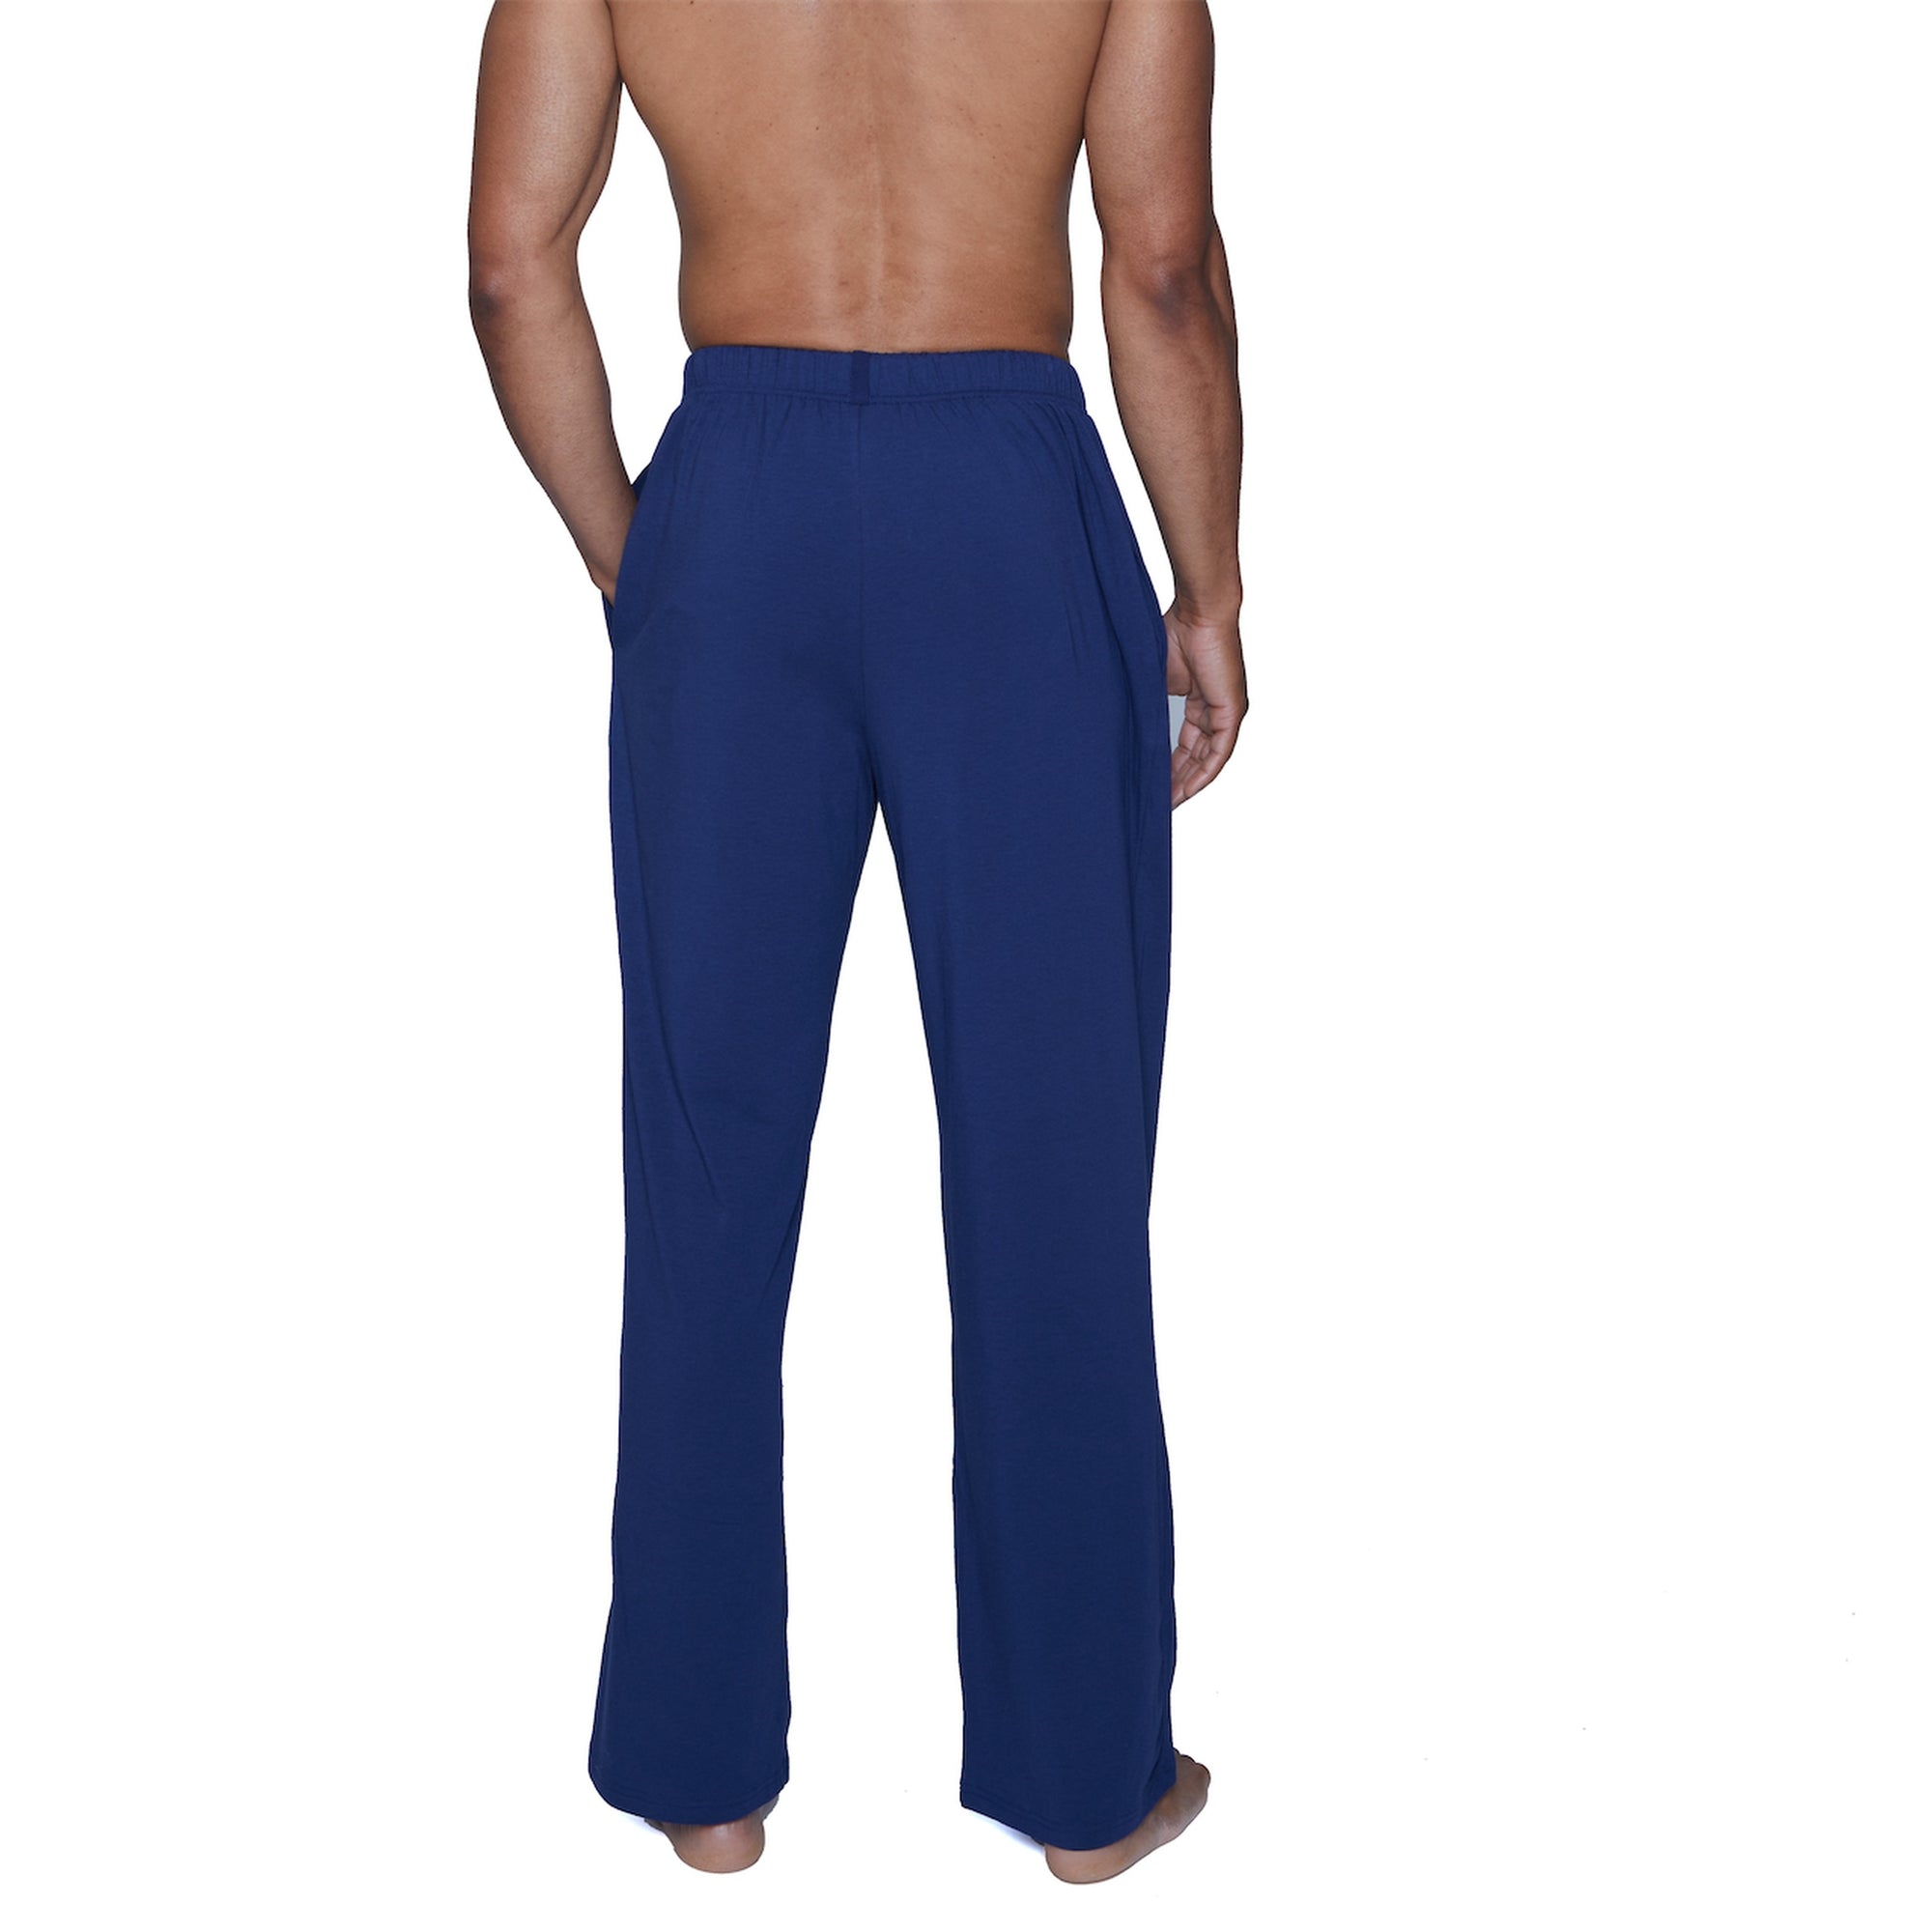 Lounge Pant with Draw String in Deep Space Blue by Wood Underwear